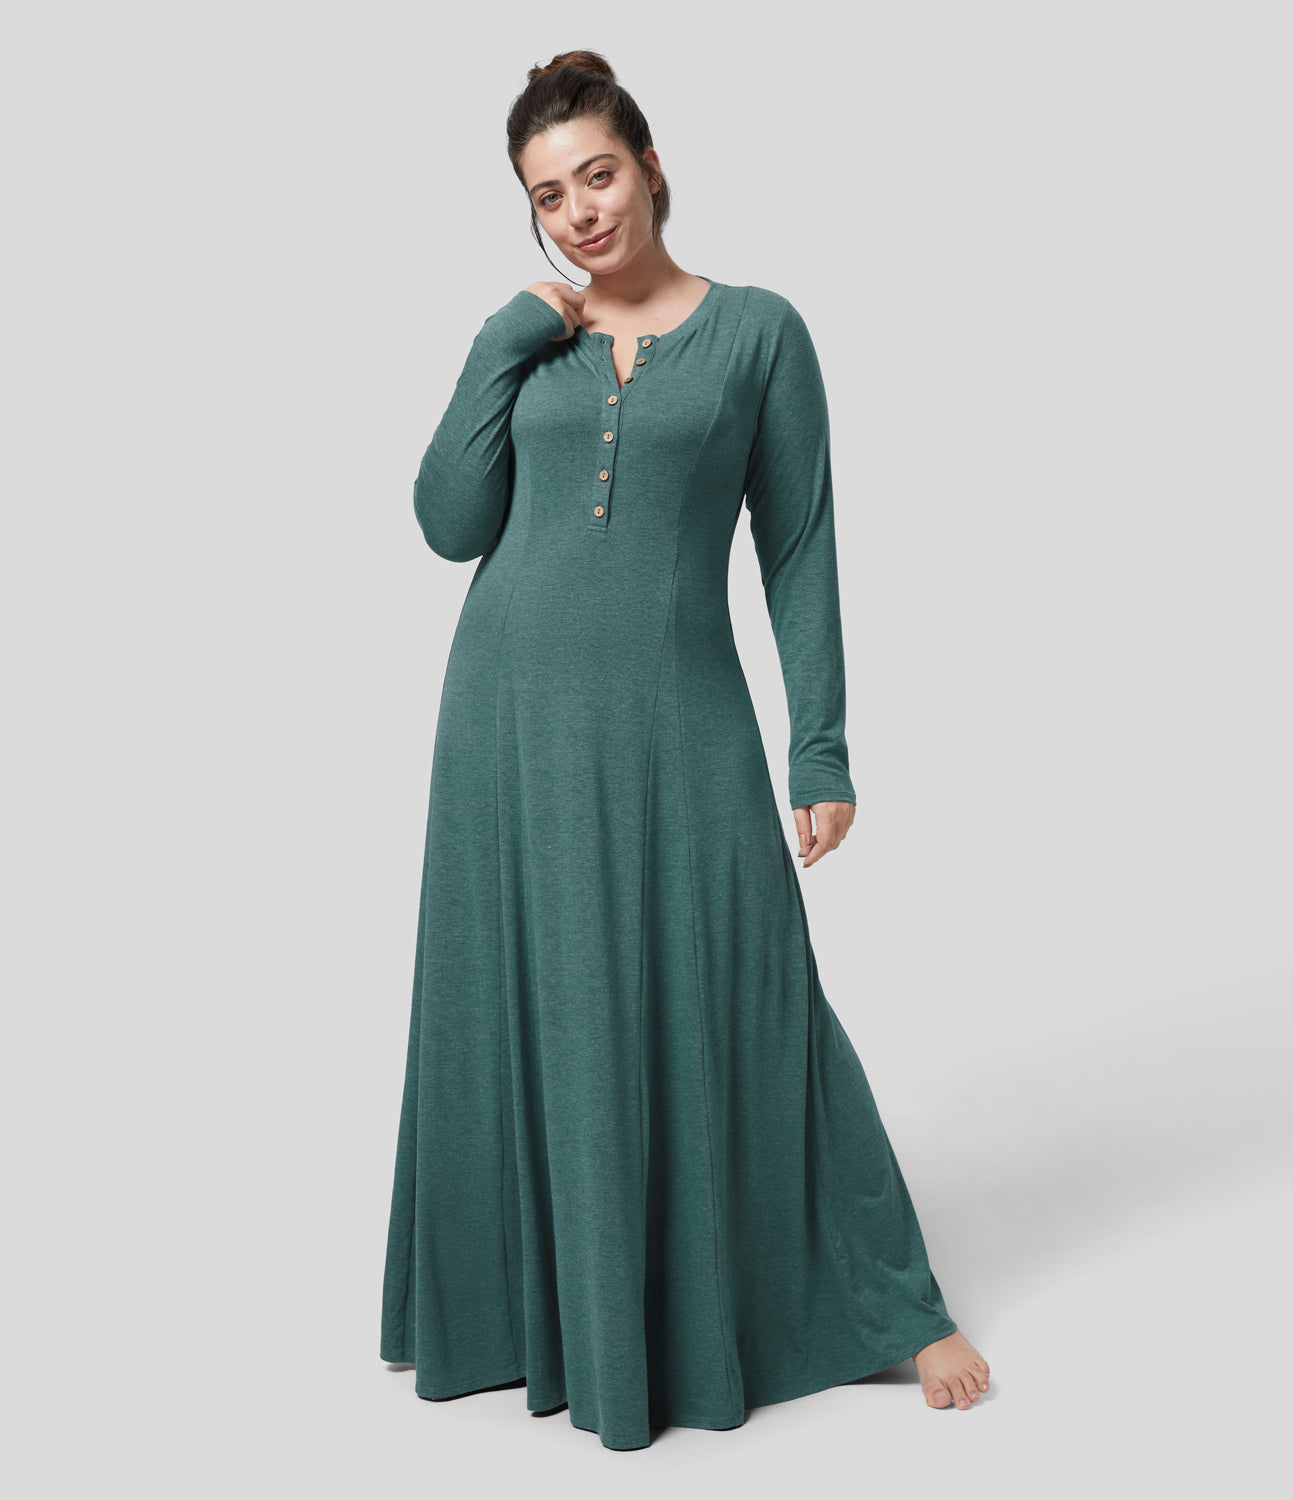 

Halara Round Neck Button Long Sleeve Flare Maxi Casual Plus Size Dress Plus Size Dress - Jade Green Floral Yarn